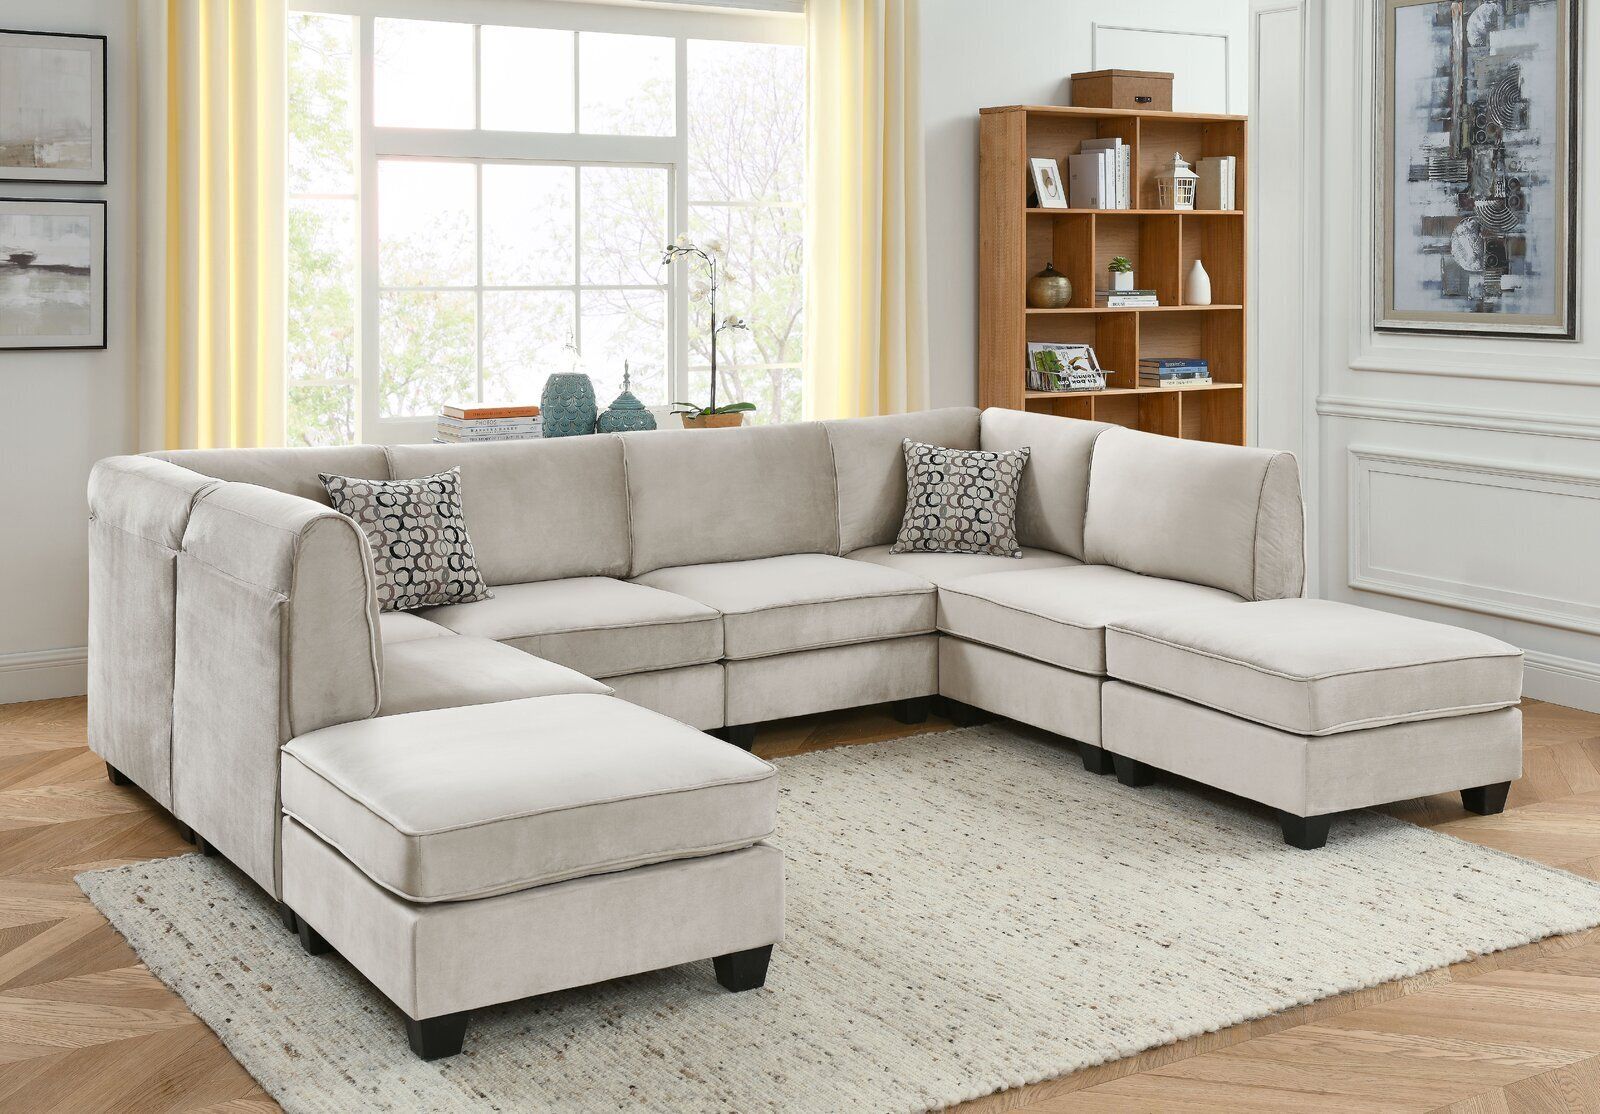 Sectional Sofa With Ottoman – Ideas On Foter Inside Sectional Sofas With Ottomans And Tufted Back Cushion (Gallery 9 of 20)